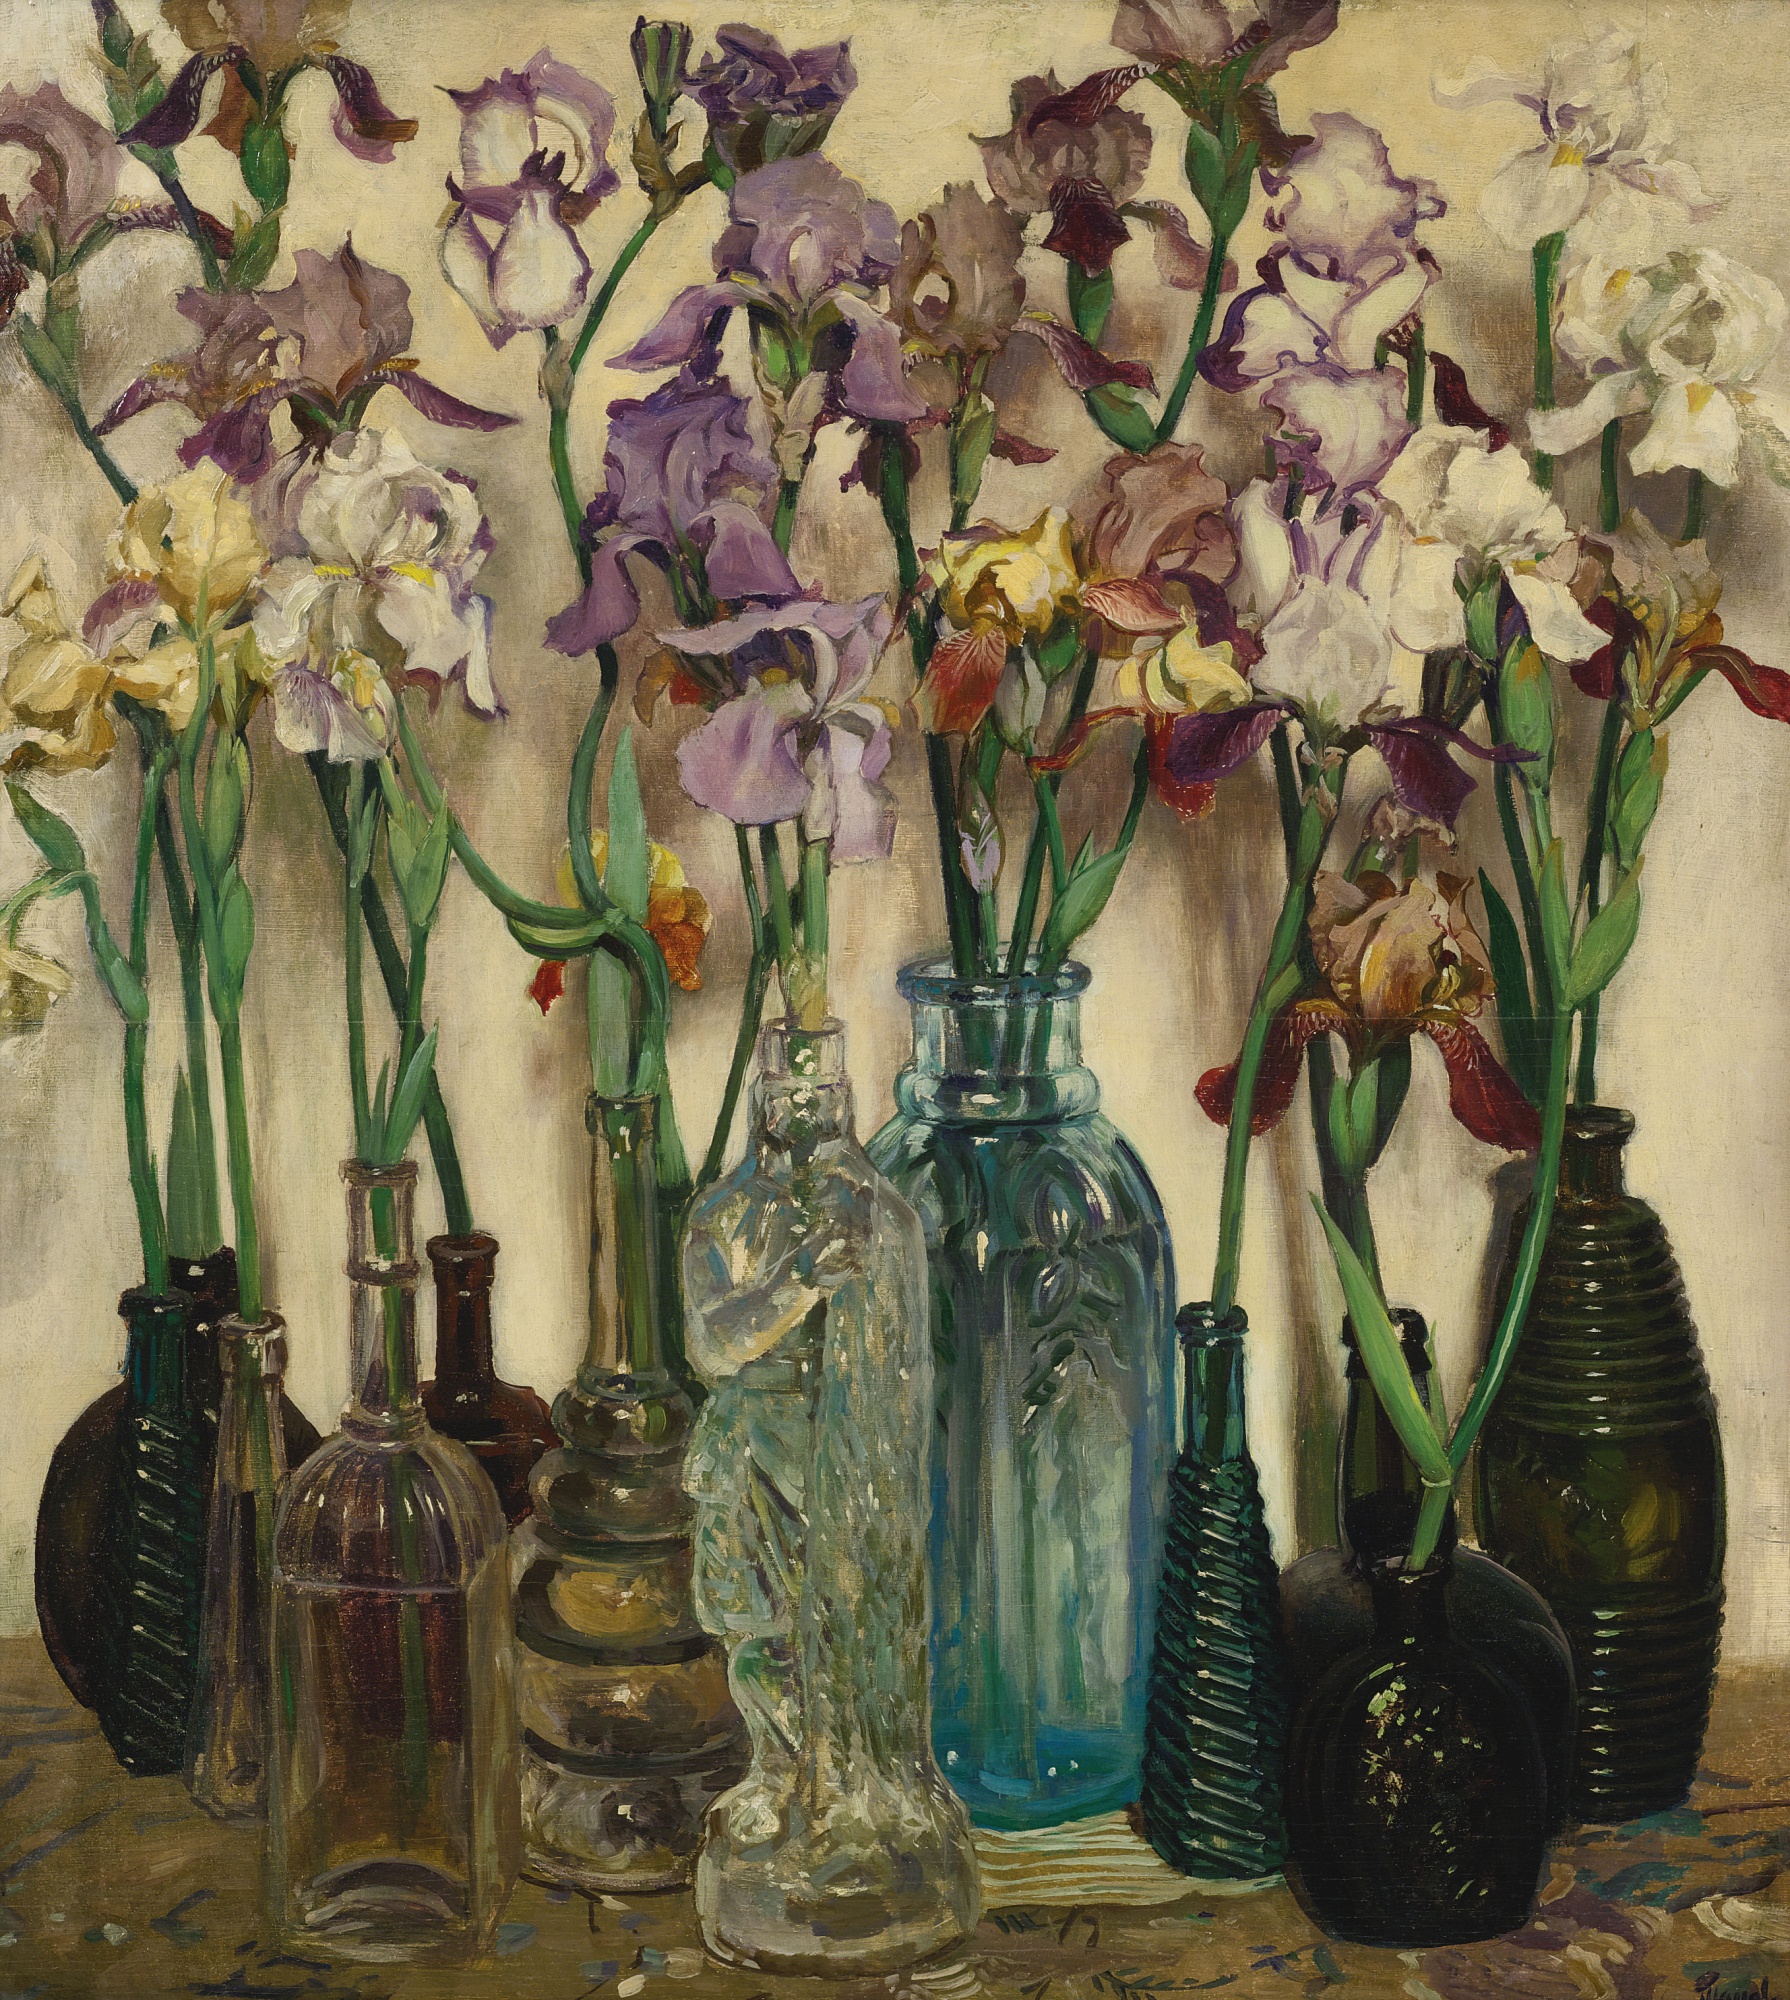 Rum Row, by Frederick Judd Waugh, 1922